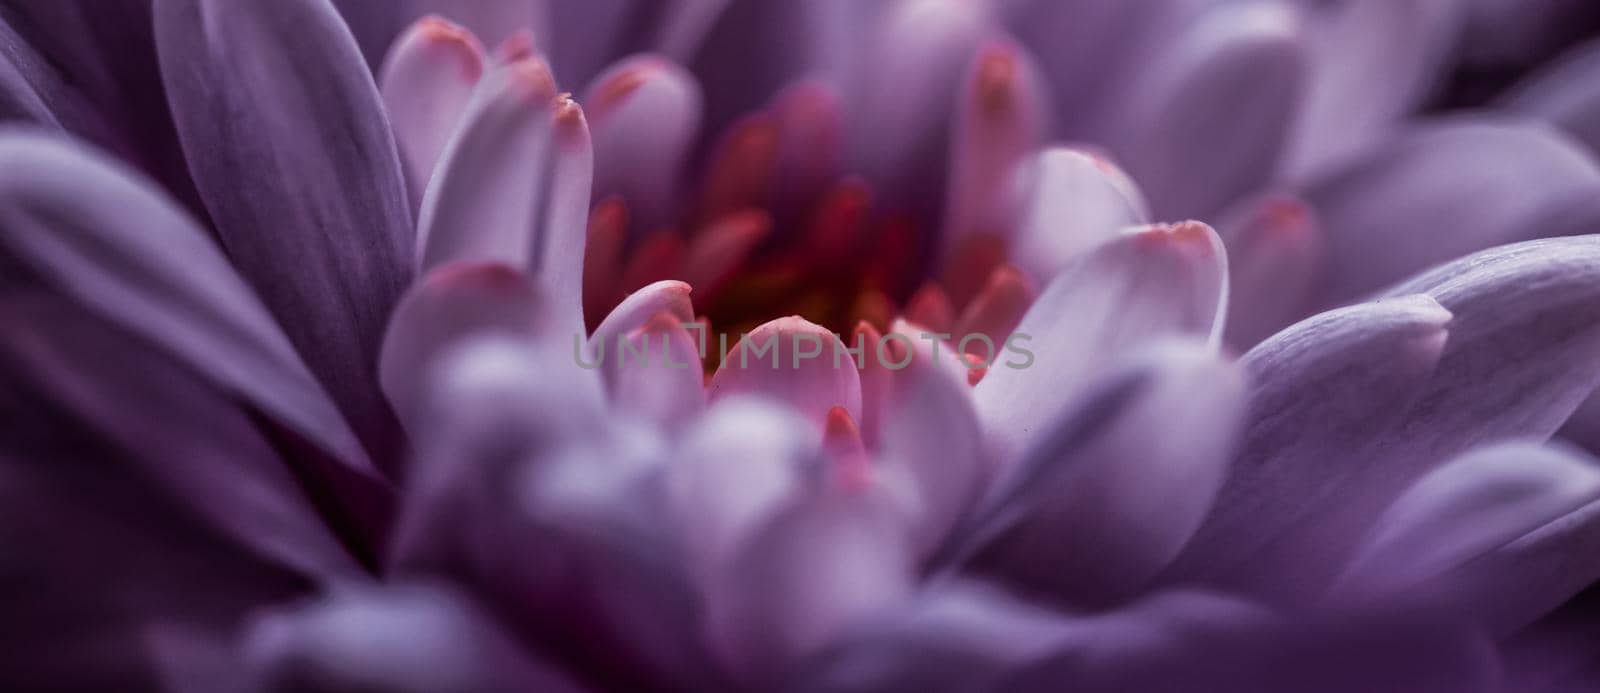 Flora, branding and love concept - Purple daisy flower petals in bloom, abstract floral blossom art background, flowers in spring nature for perfume scent, wedding, luxury beauty brand holiday design